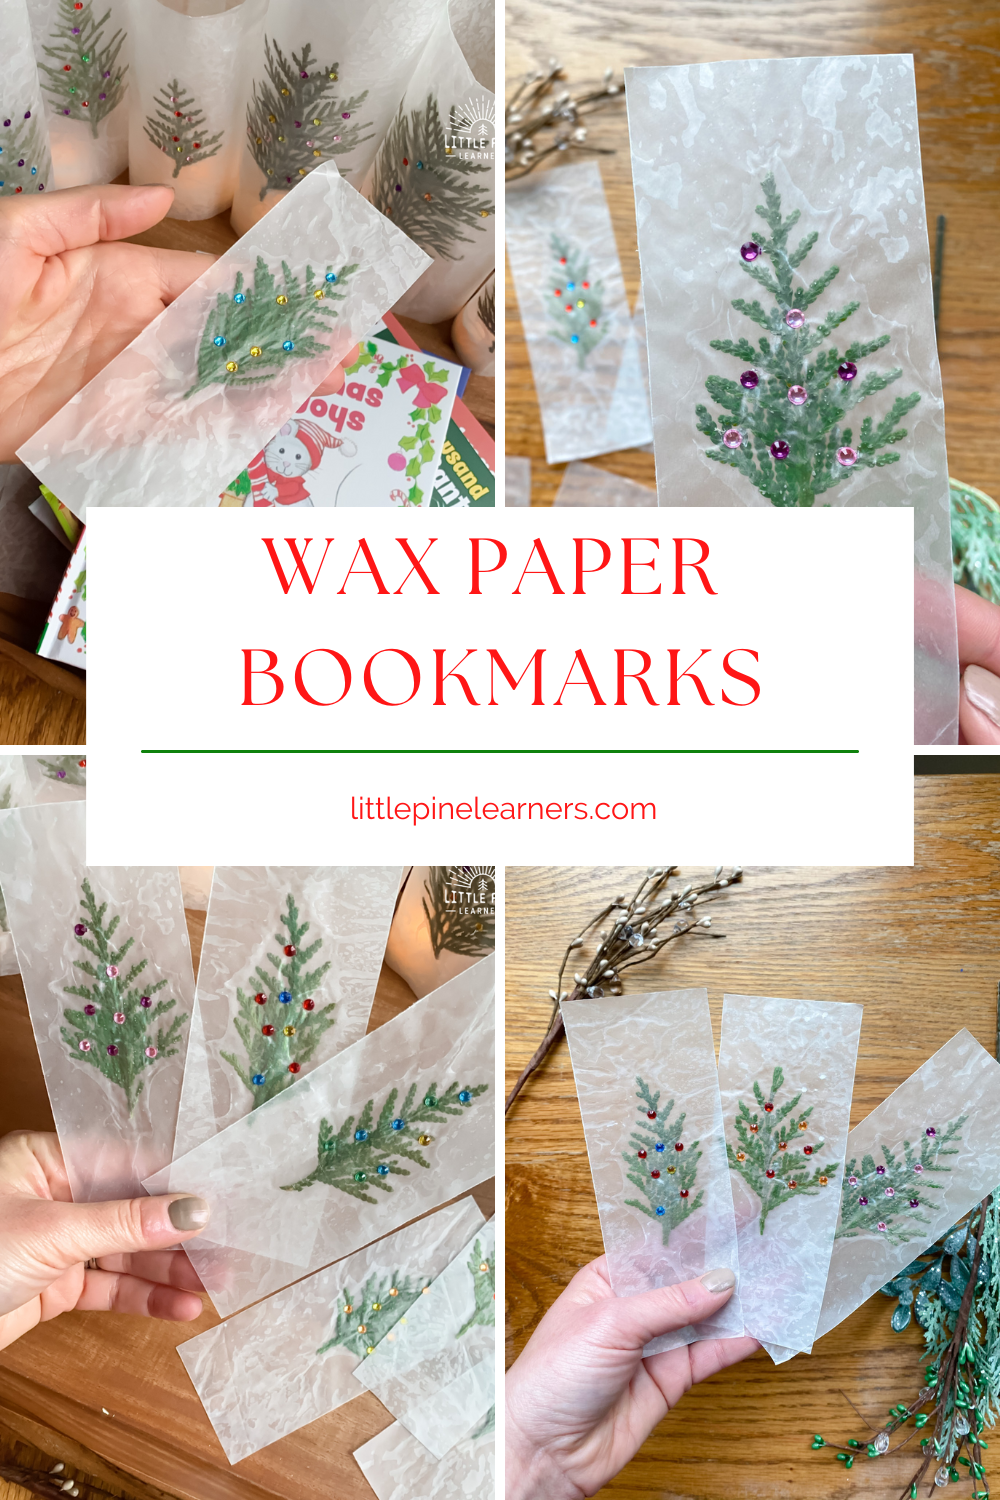 Make your own bookmark with wax paper!